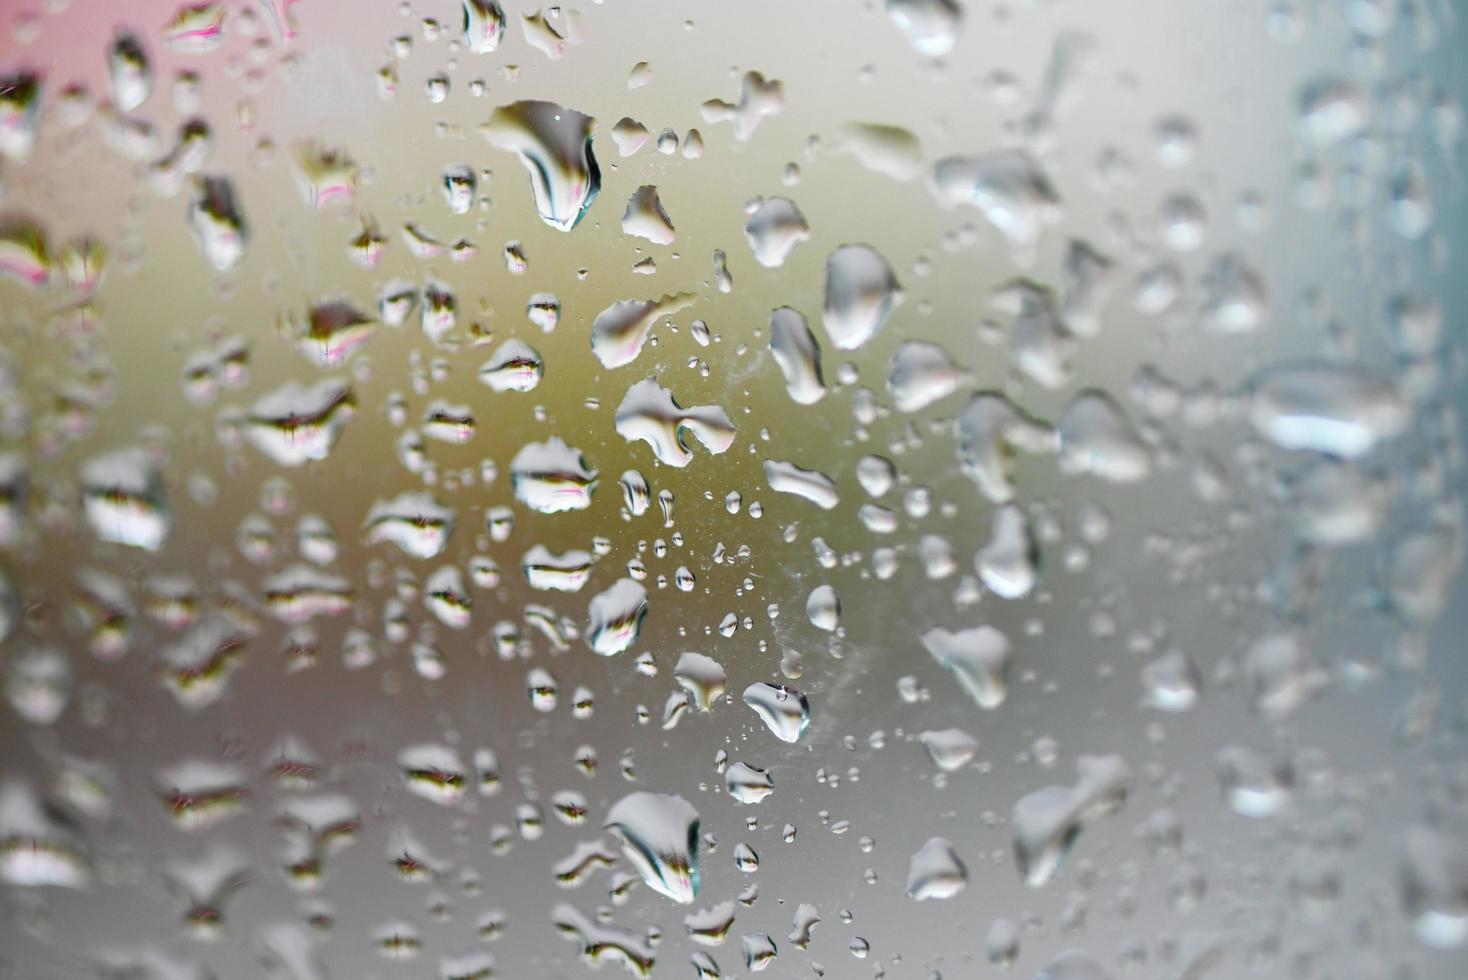 water drop glass background , nature water drop after rain , raindrops on glass window in the rainy season photo